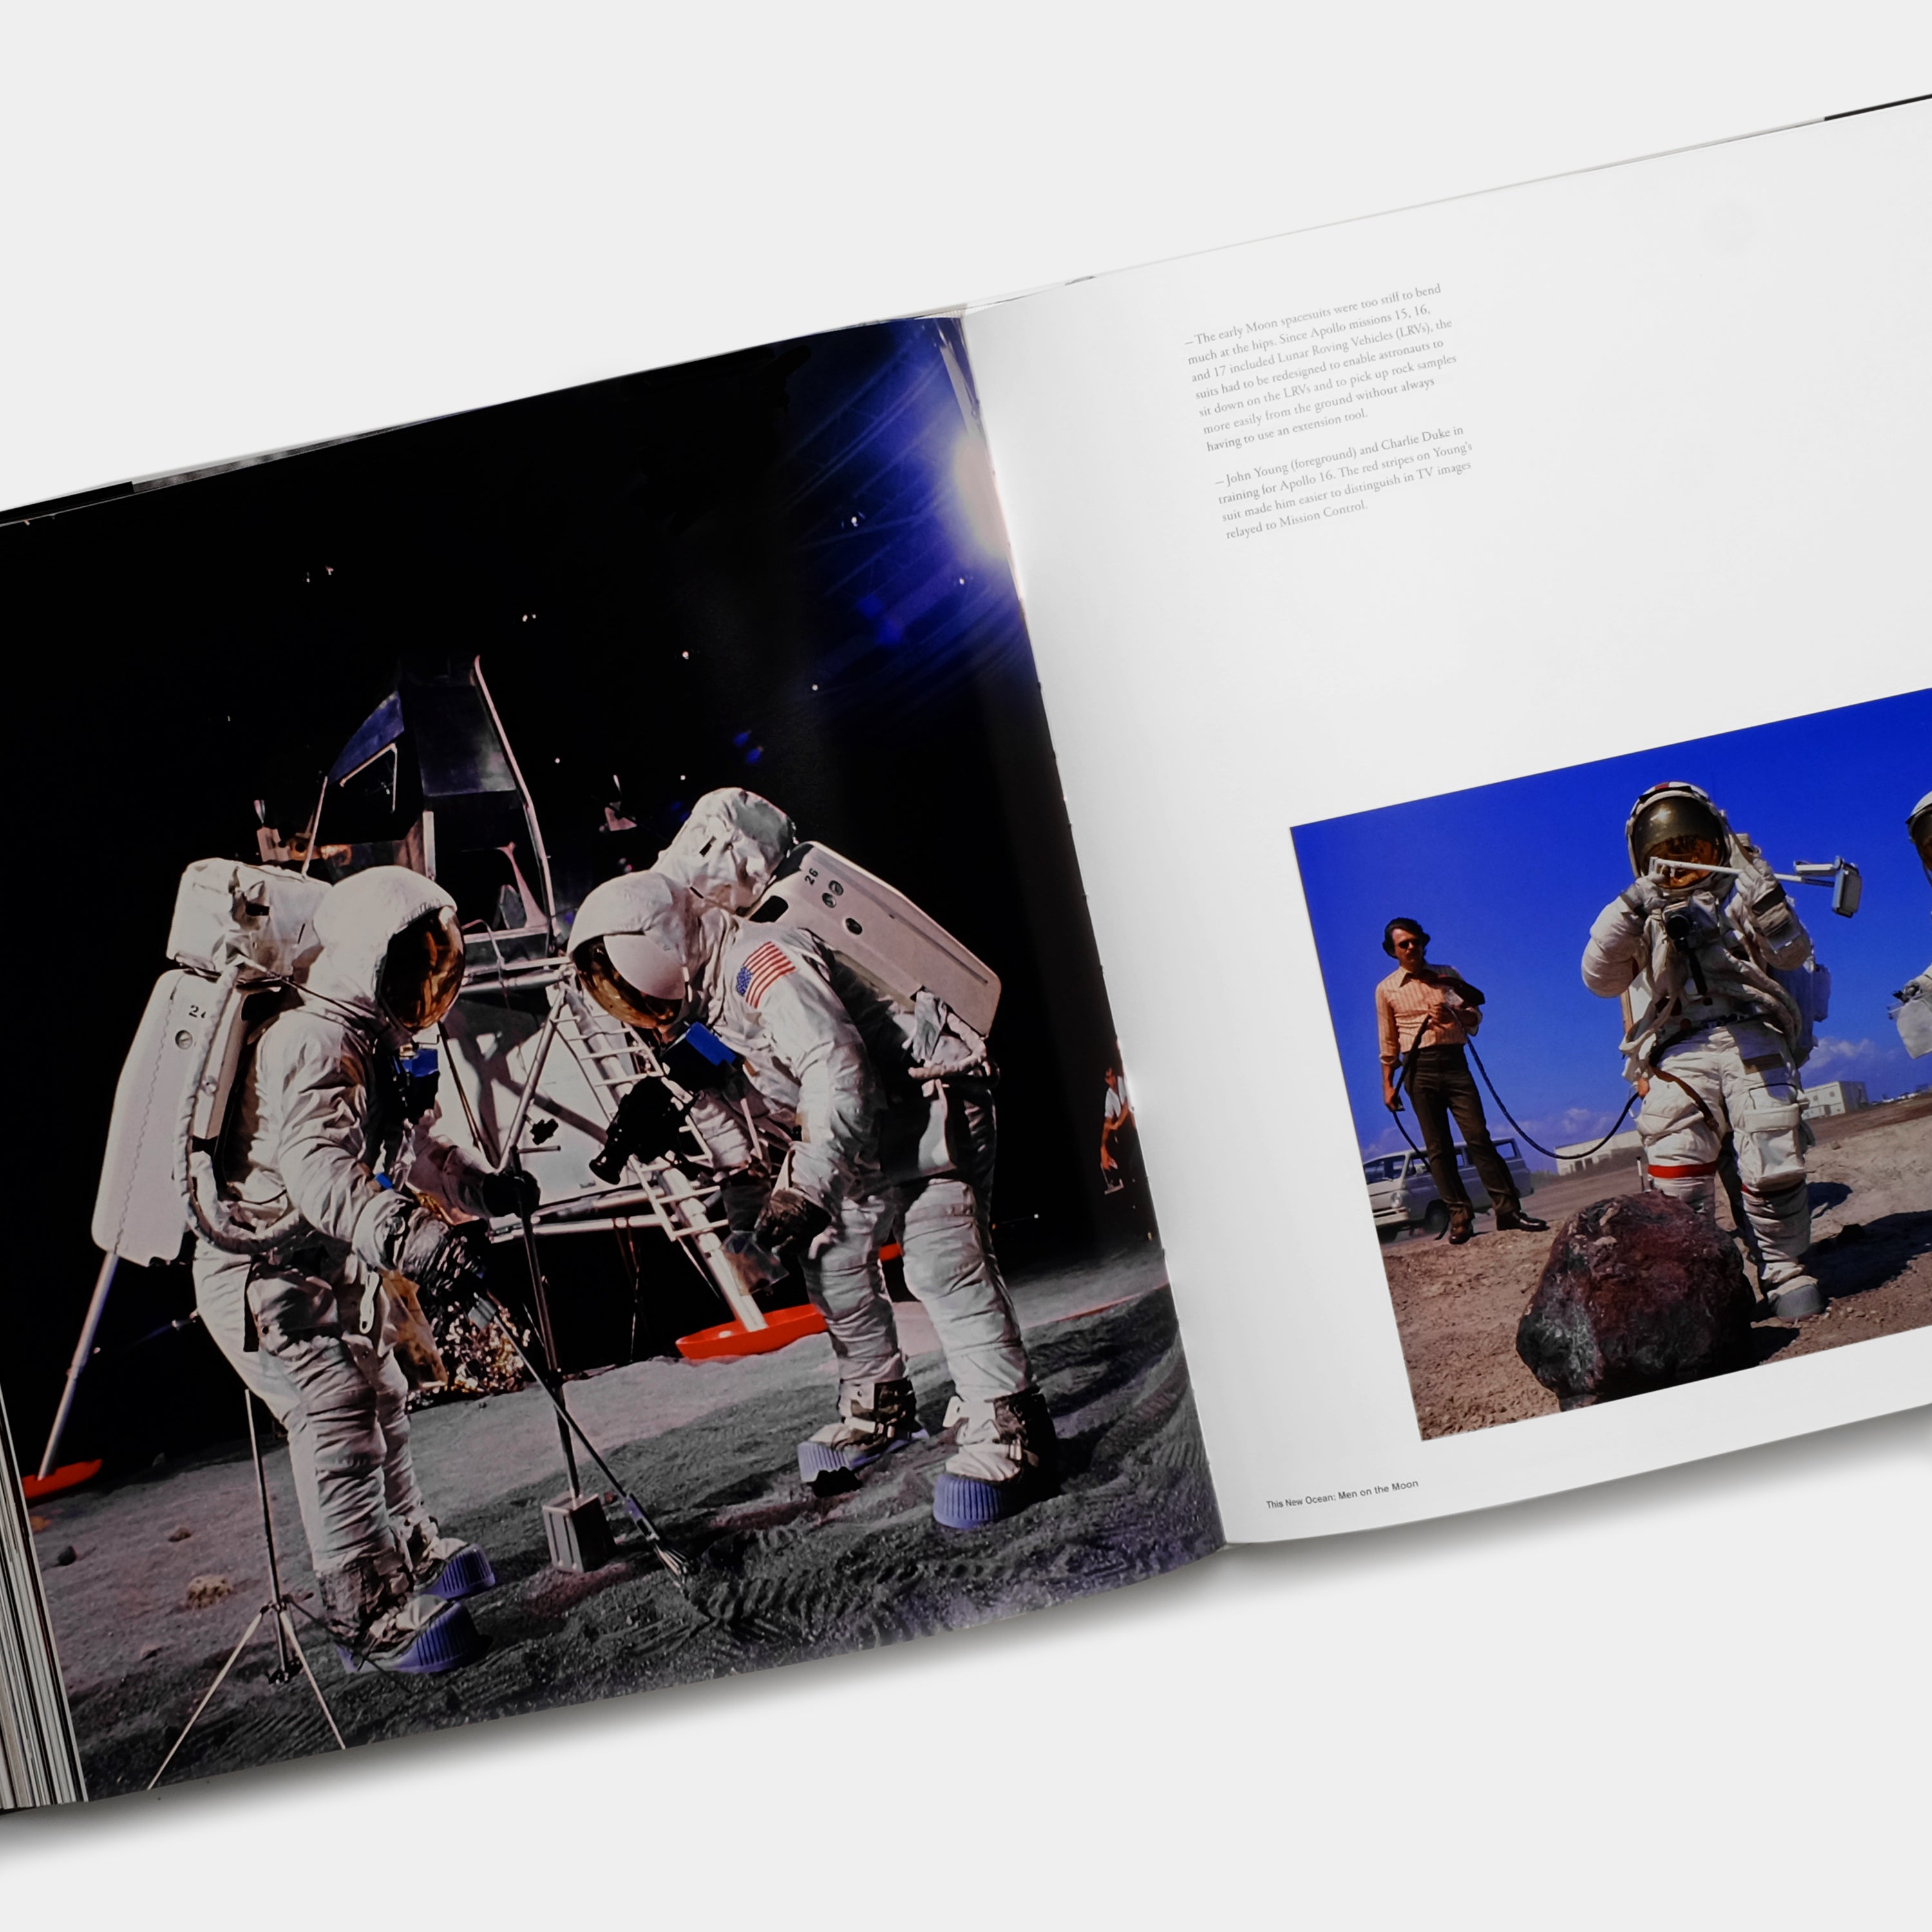 The Nasa Archives: 60 Years In Space by Andrew Chaikin XL Taschen Book